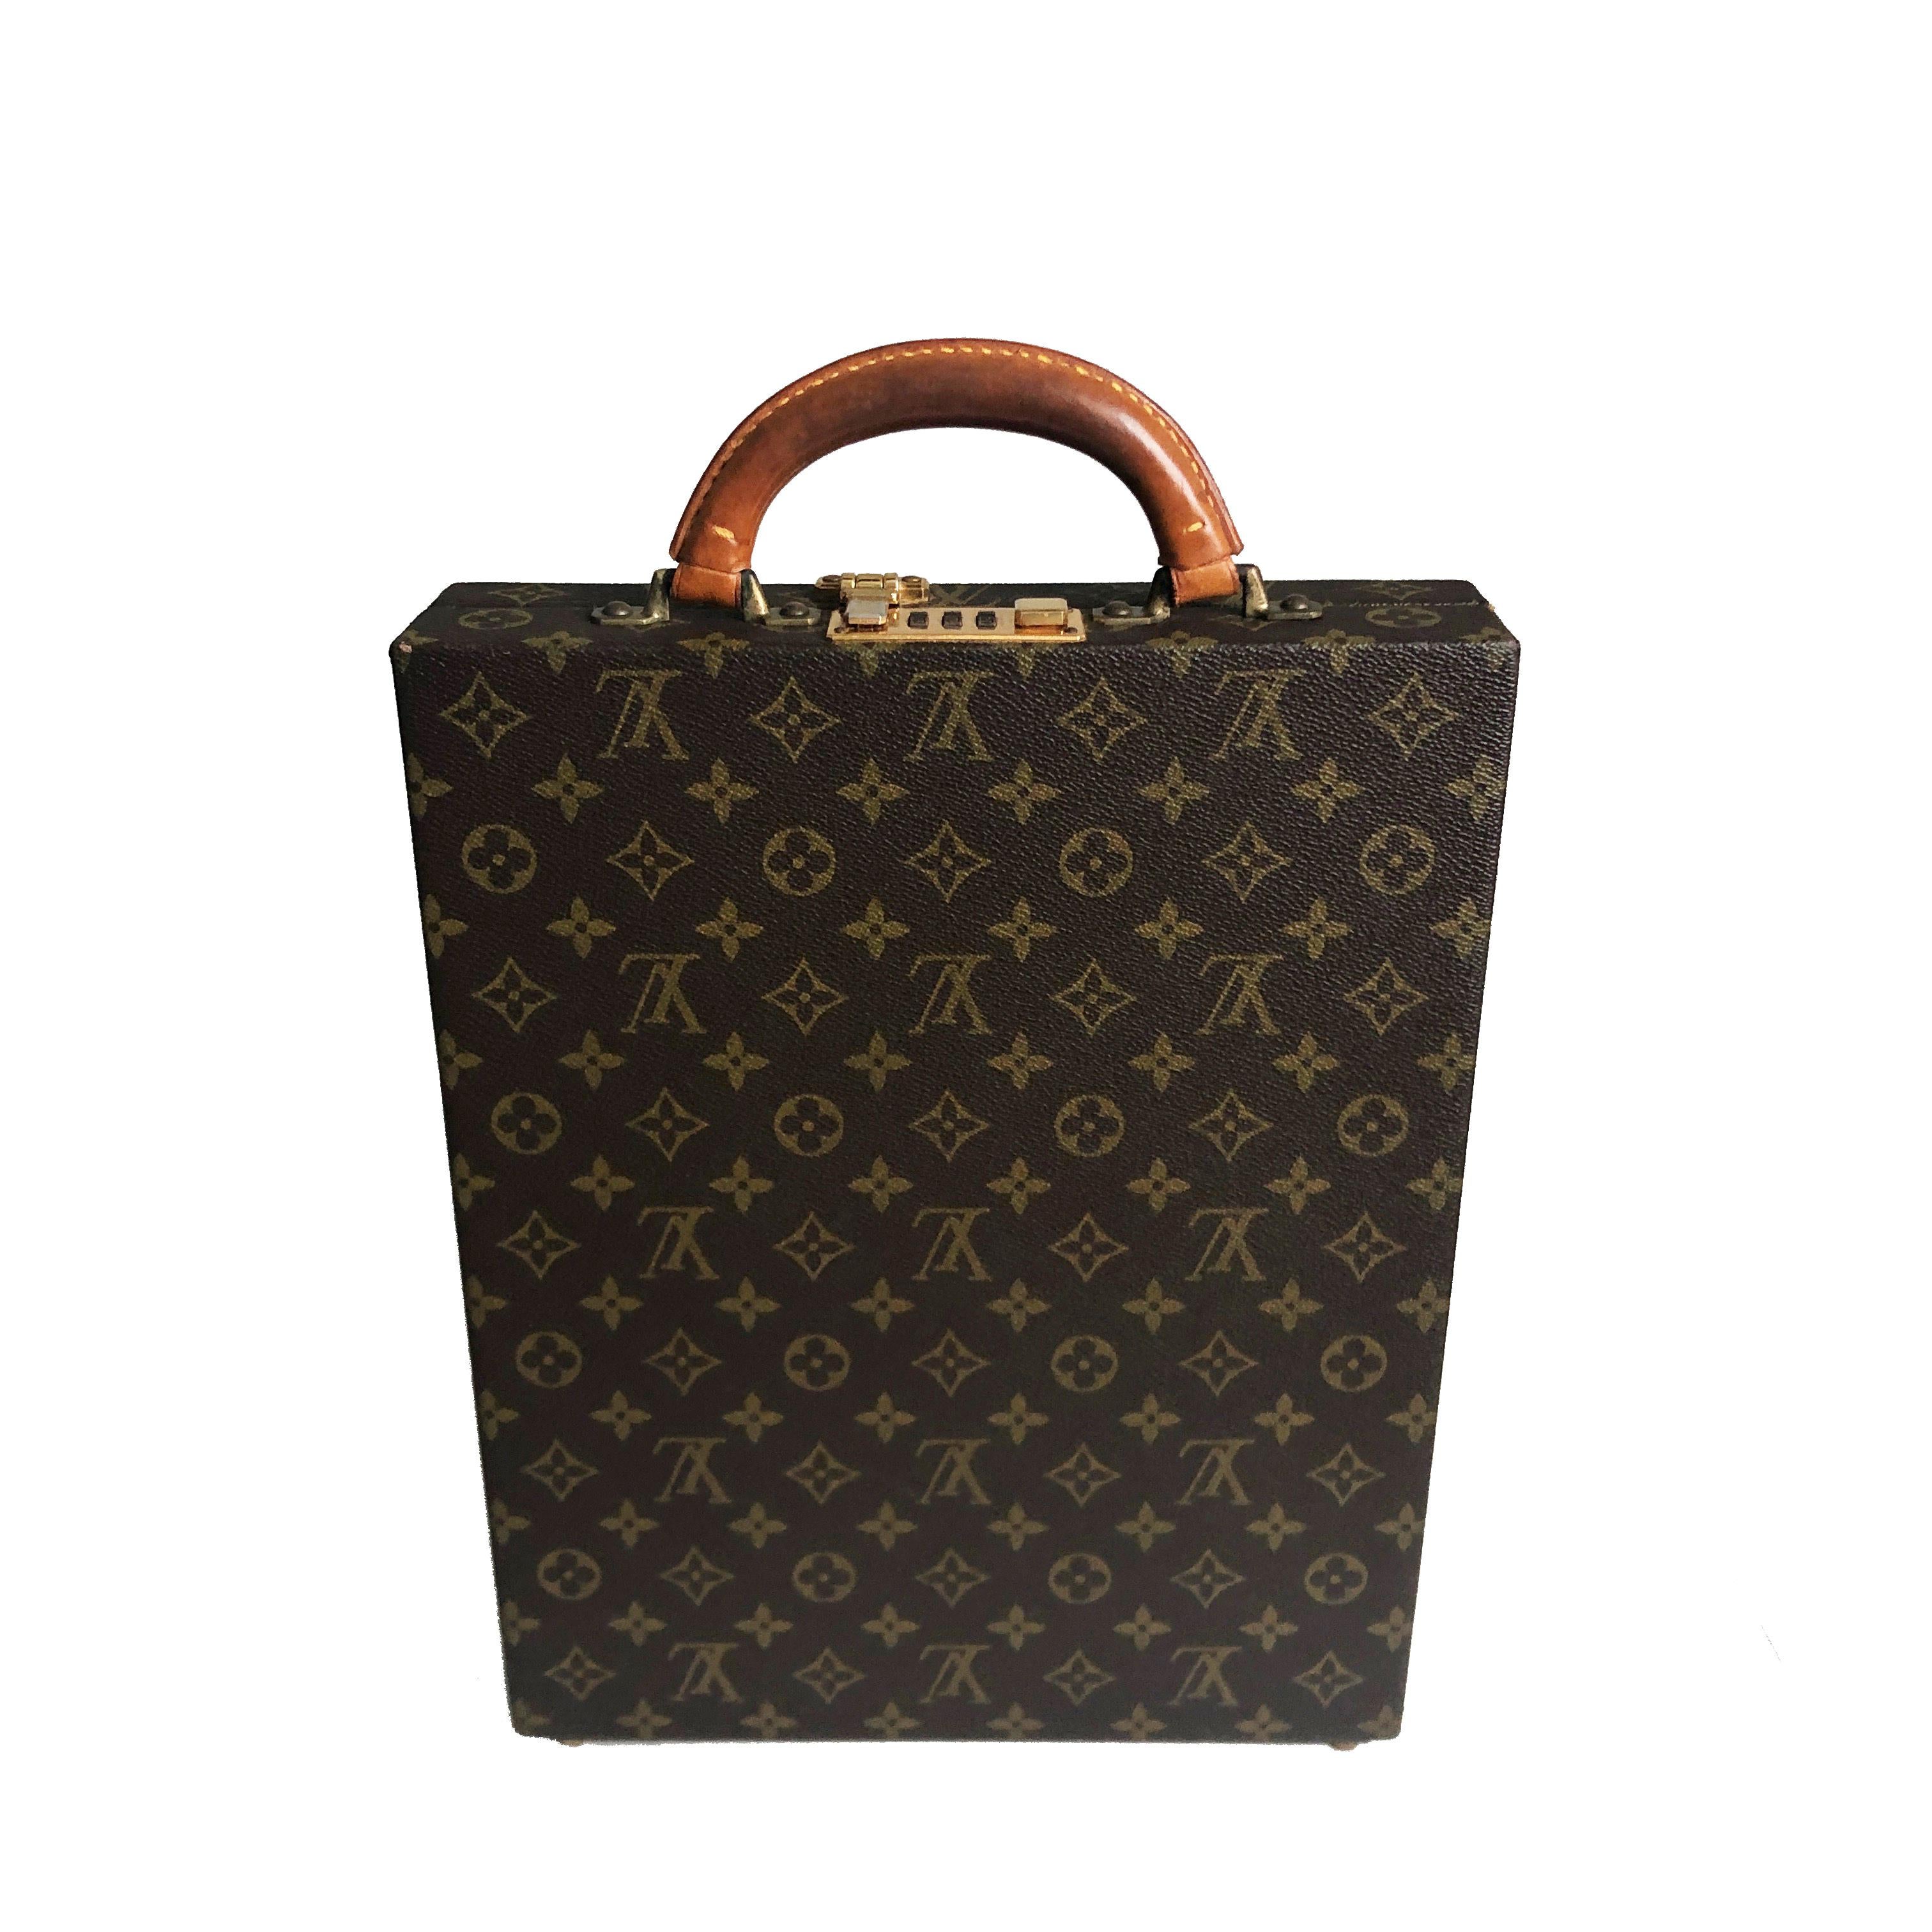 Authentic, preowned vintage Louis Vuitton Hardside Briefcase Monogram Canvas from the 80s.  Lined in leatherette, with organizer section on inner top lid. Comes with its original combination lock instructions.  Preowned/vintage with some signs of